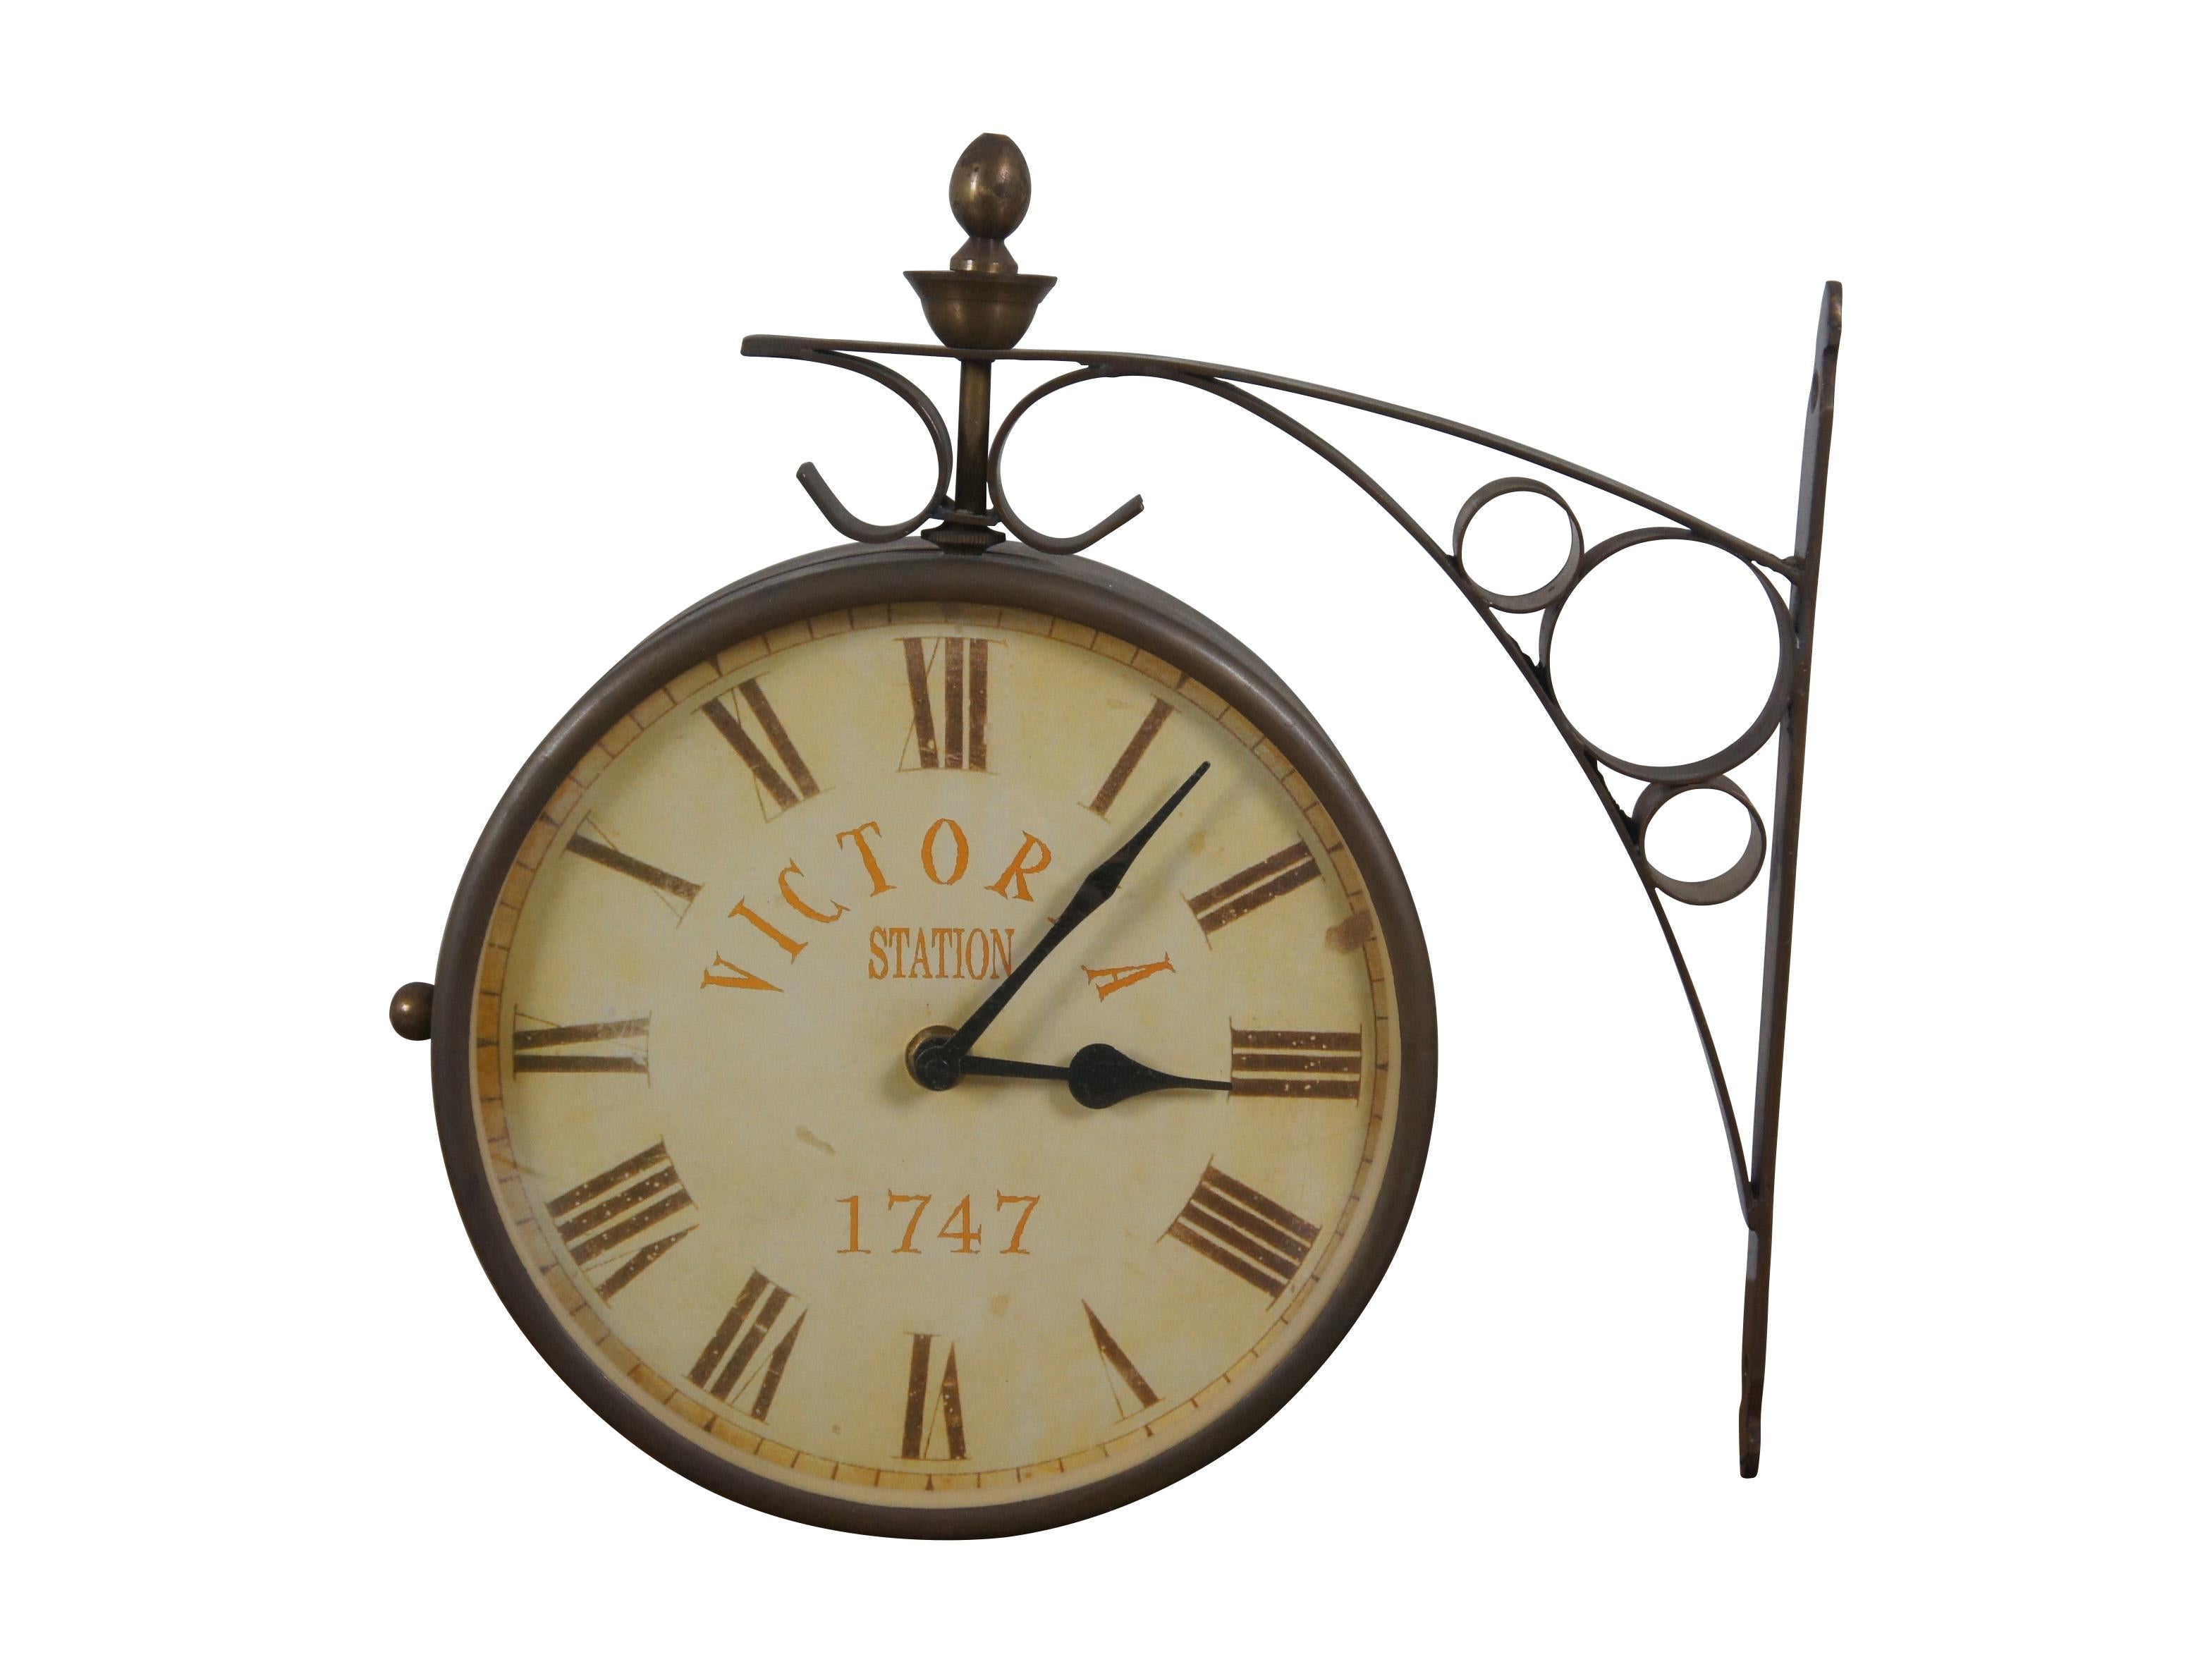 3 Available - Late 20th century double sided railway clock styled after the famous clock at Victoria Station, London. Wrought metal wall mounted support and case in a dark brass finish. 8 inch diameter printed face with faux distressing, Roman